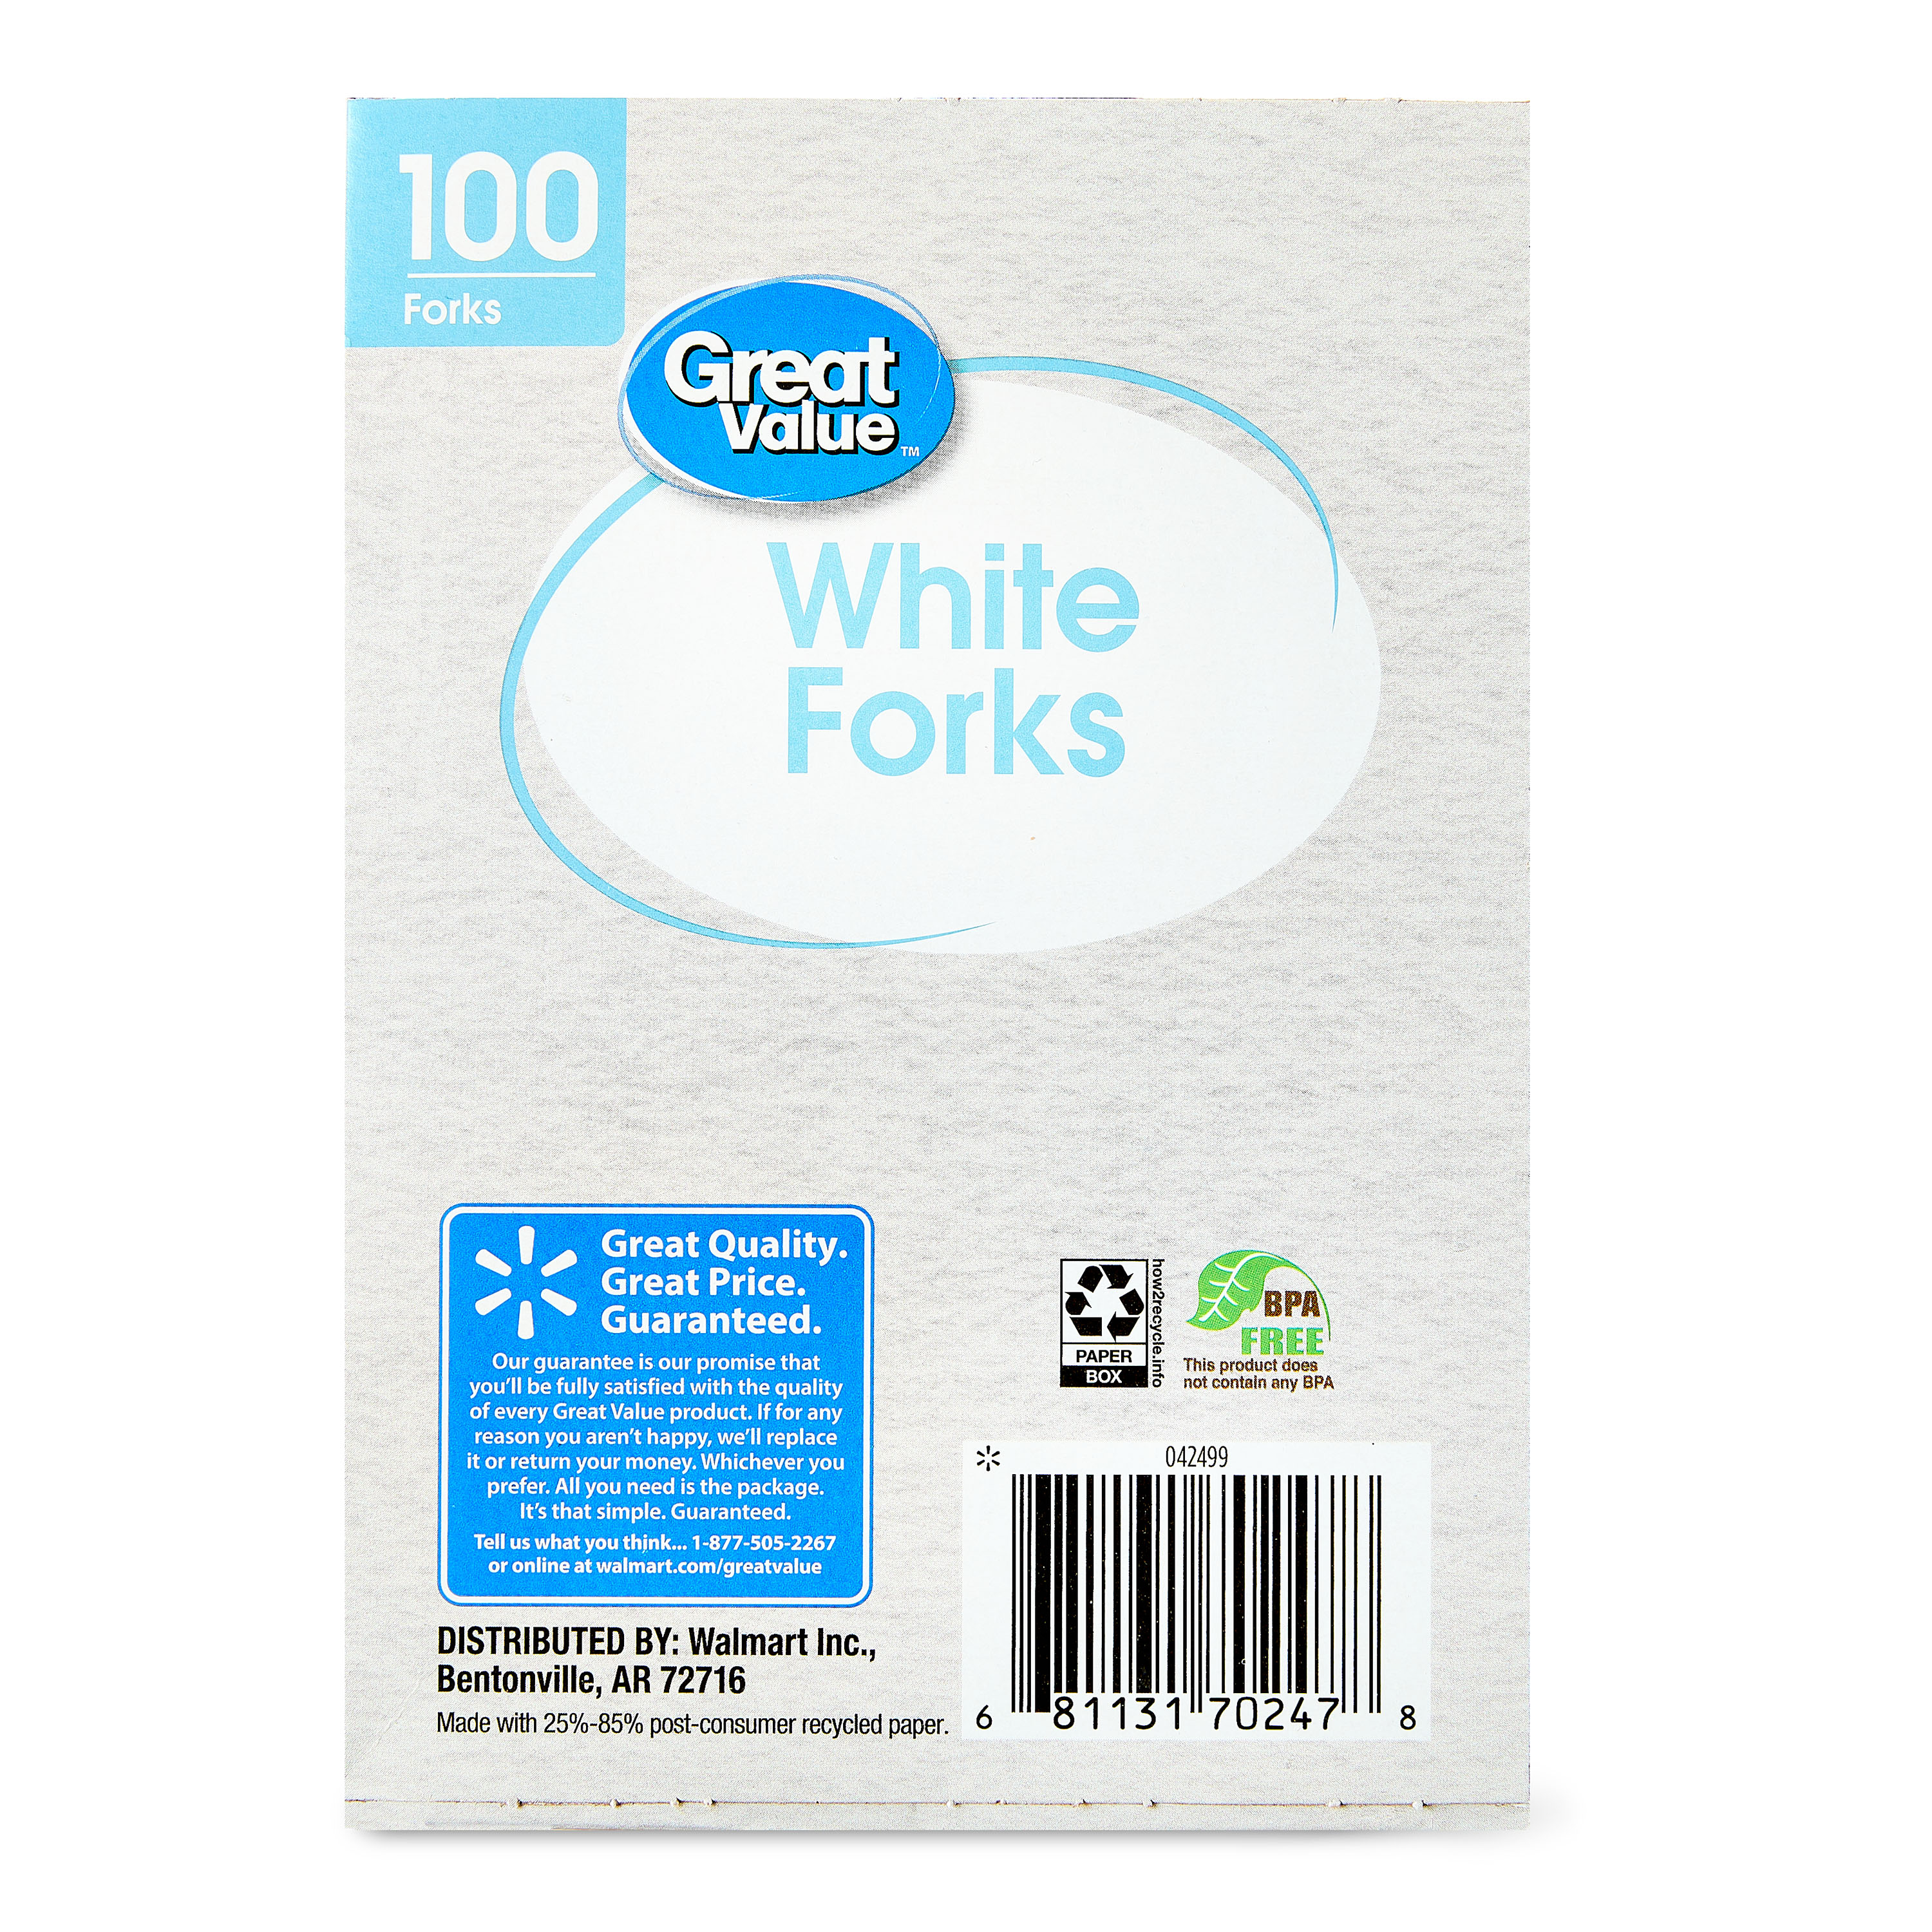 Great Value Everyday Disposable Plastic Forks, White, 100 Count - image 4 of 8